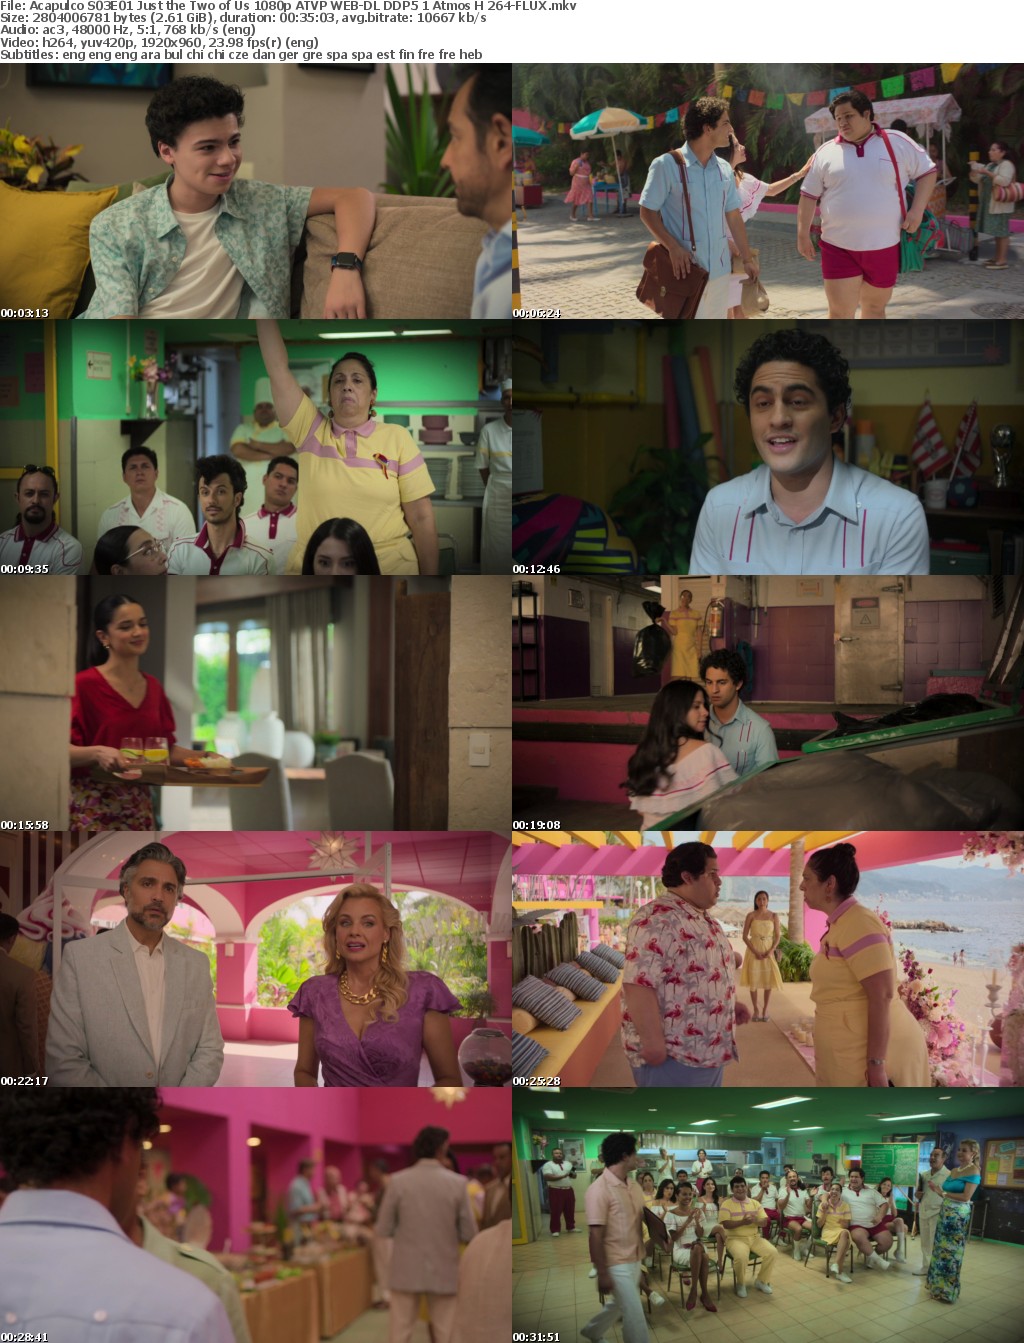 Acapulco S03E01 Just the Two of Us 1080p ATVP WEB-DL DDP5 1 Atmos H 264-FLUX